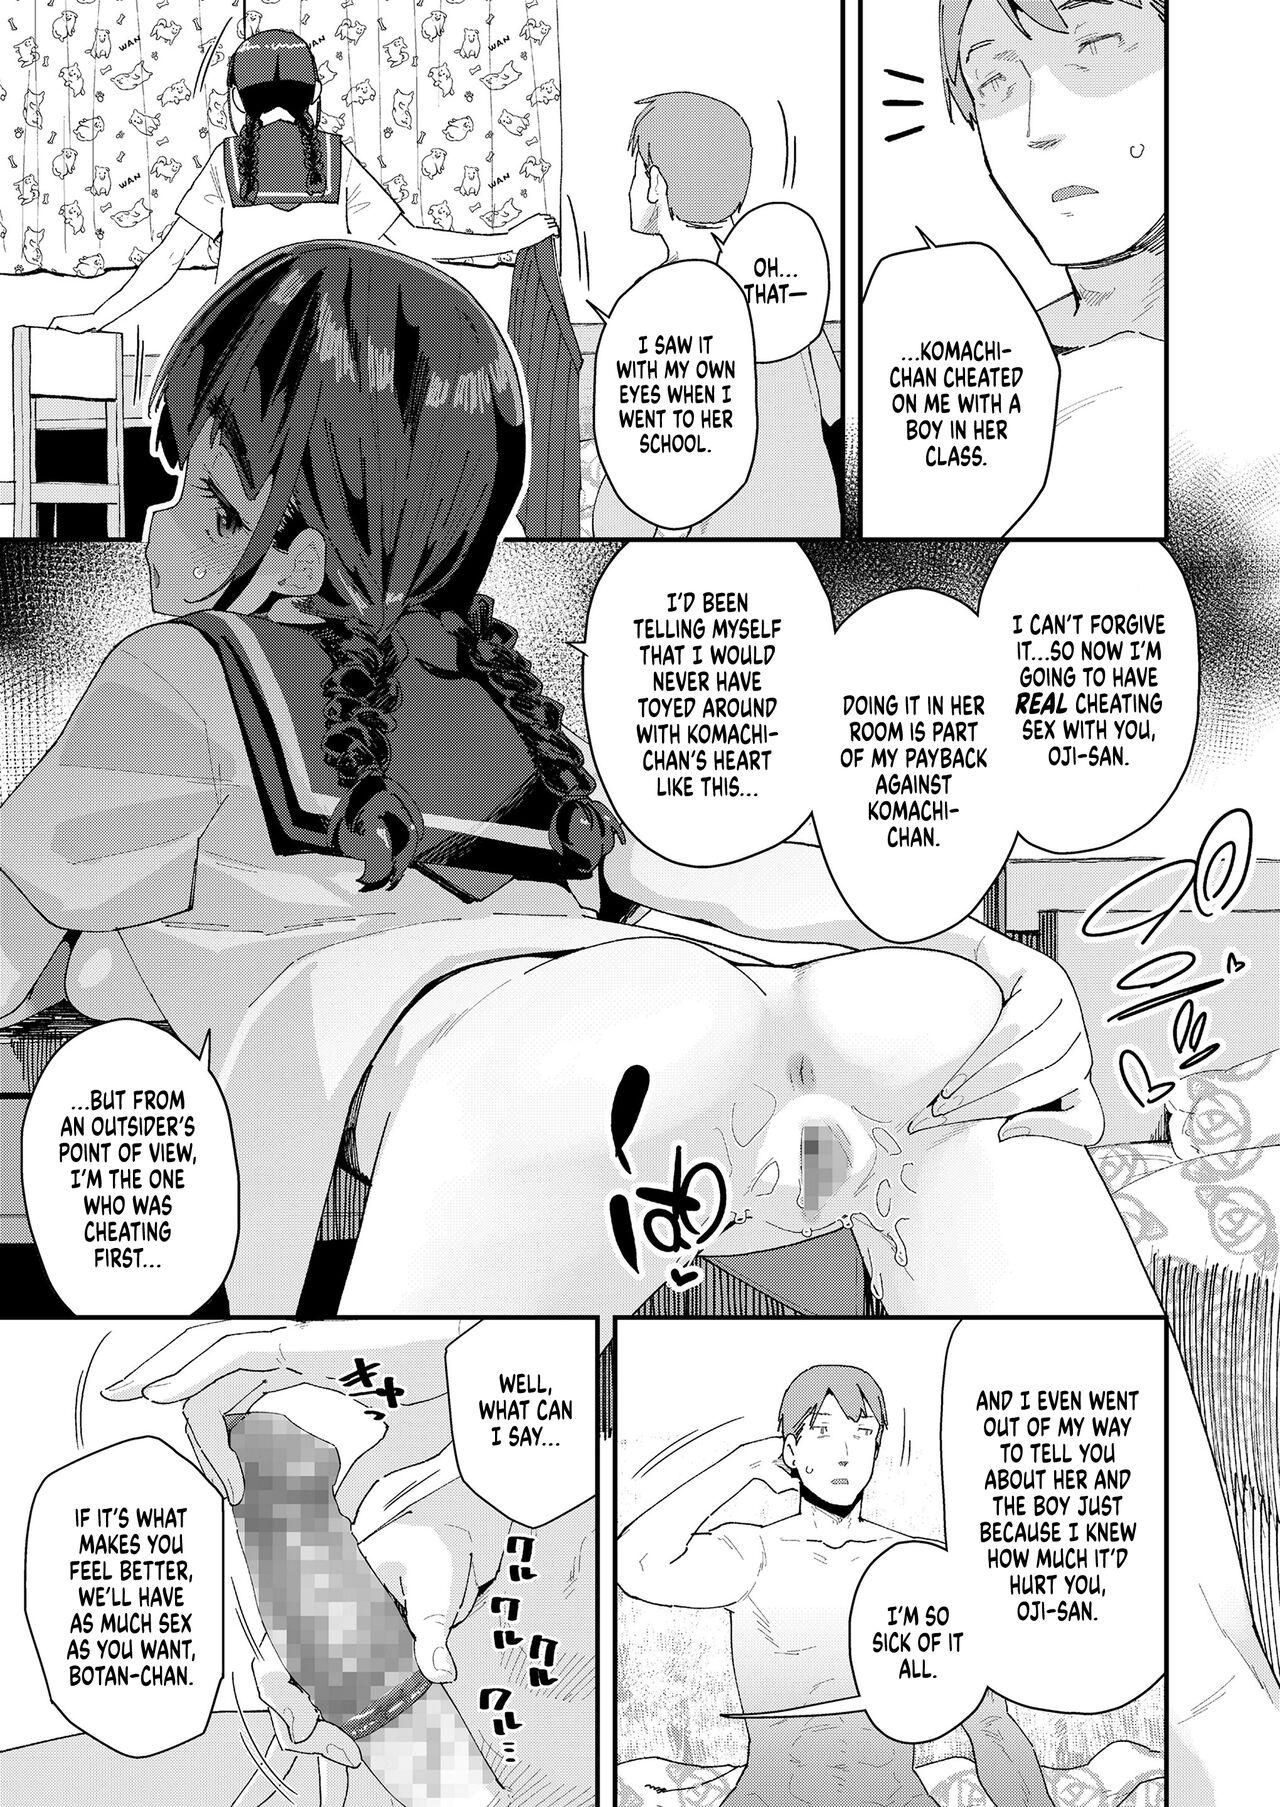 Slave Mitsu to Chou 3 | Nectar & Butterfly 3 Best Blowjob Ever - Page 9